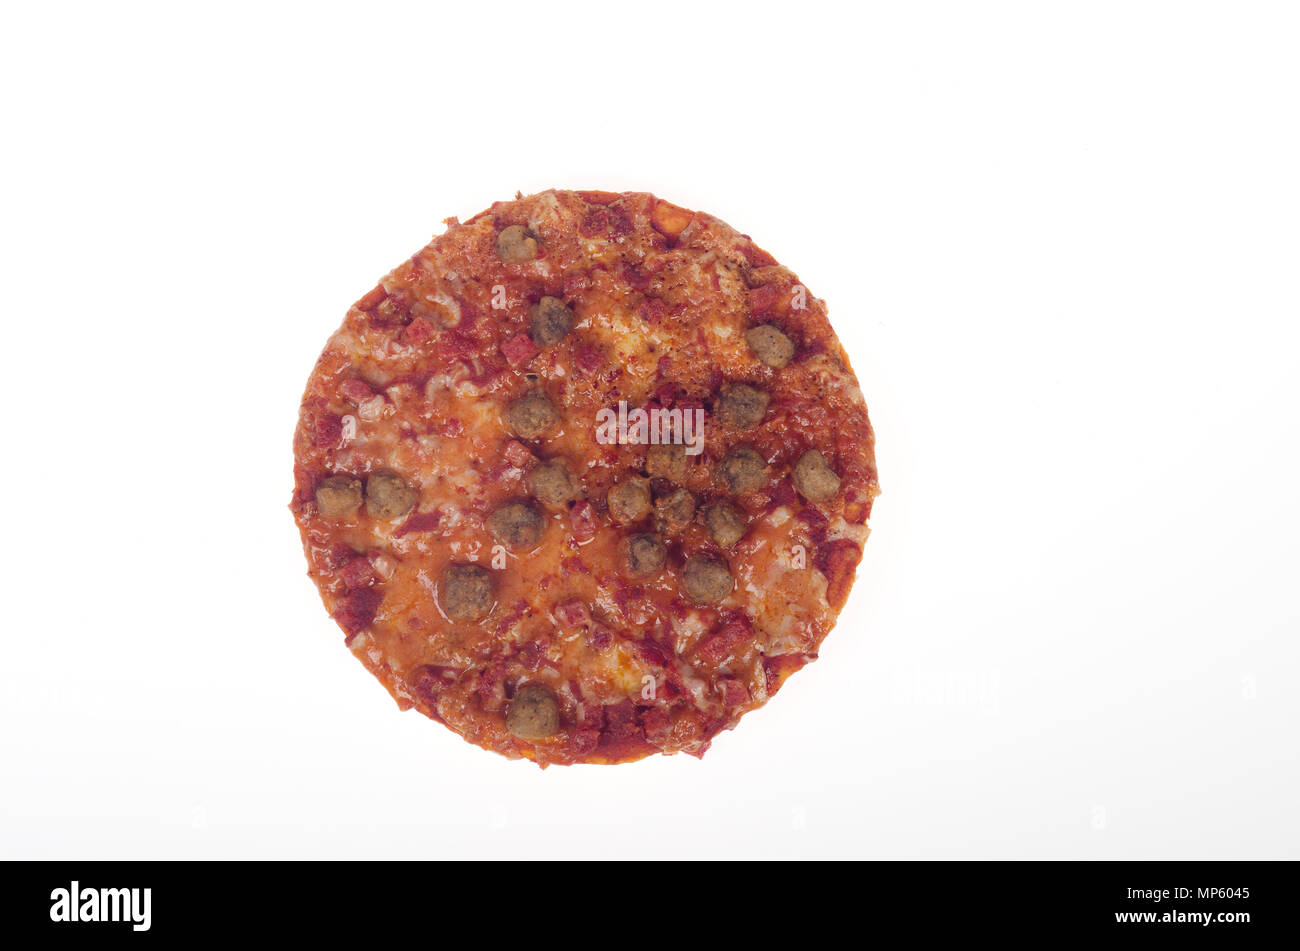 Small personal pizza with sausage and pepperoni meat along with tomato sauce and cheese Stock Photo